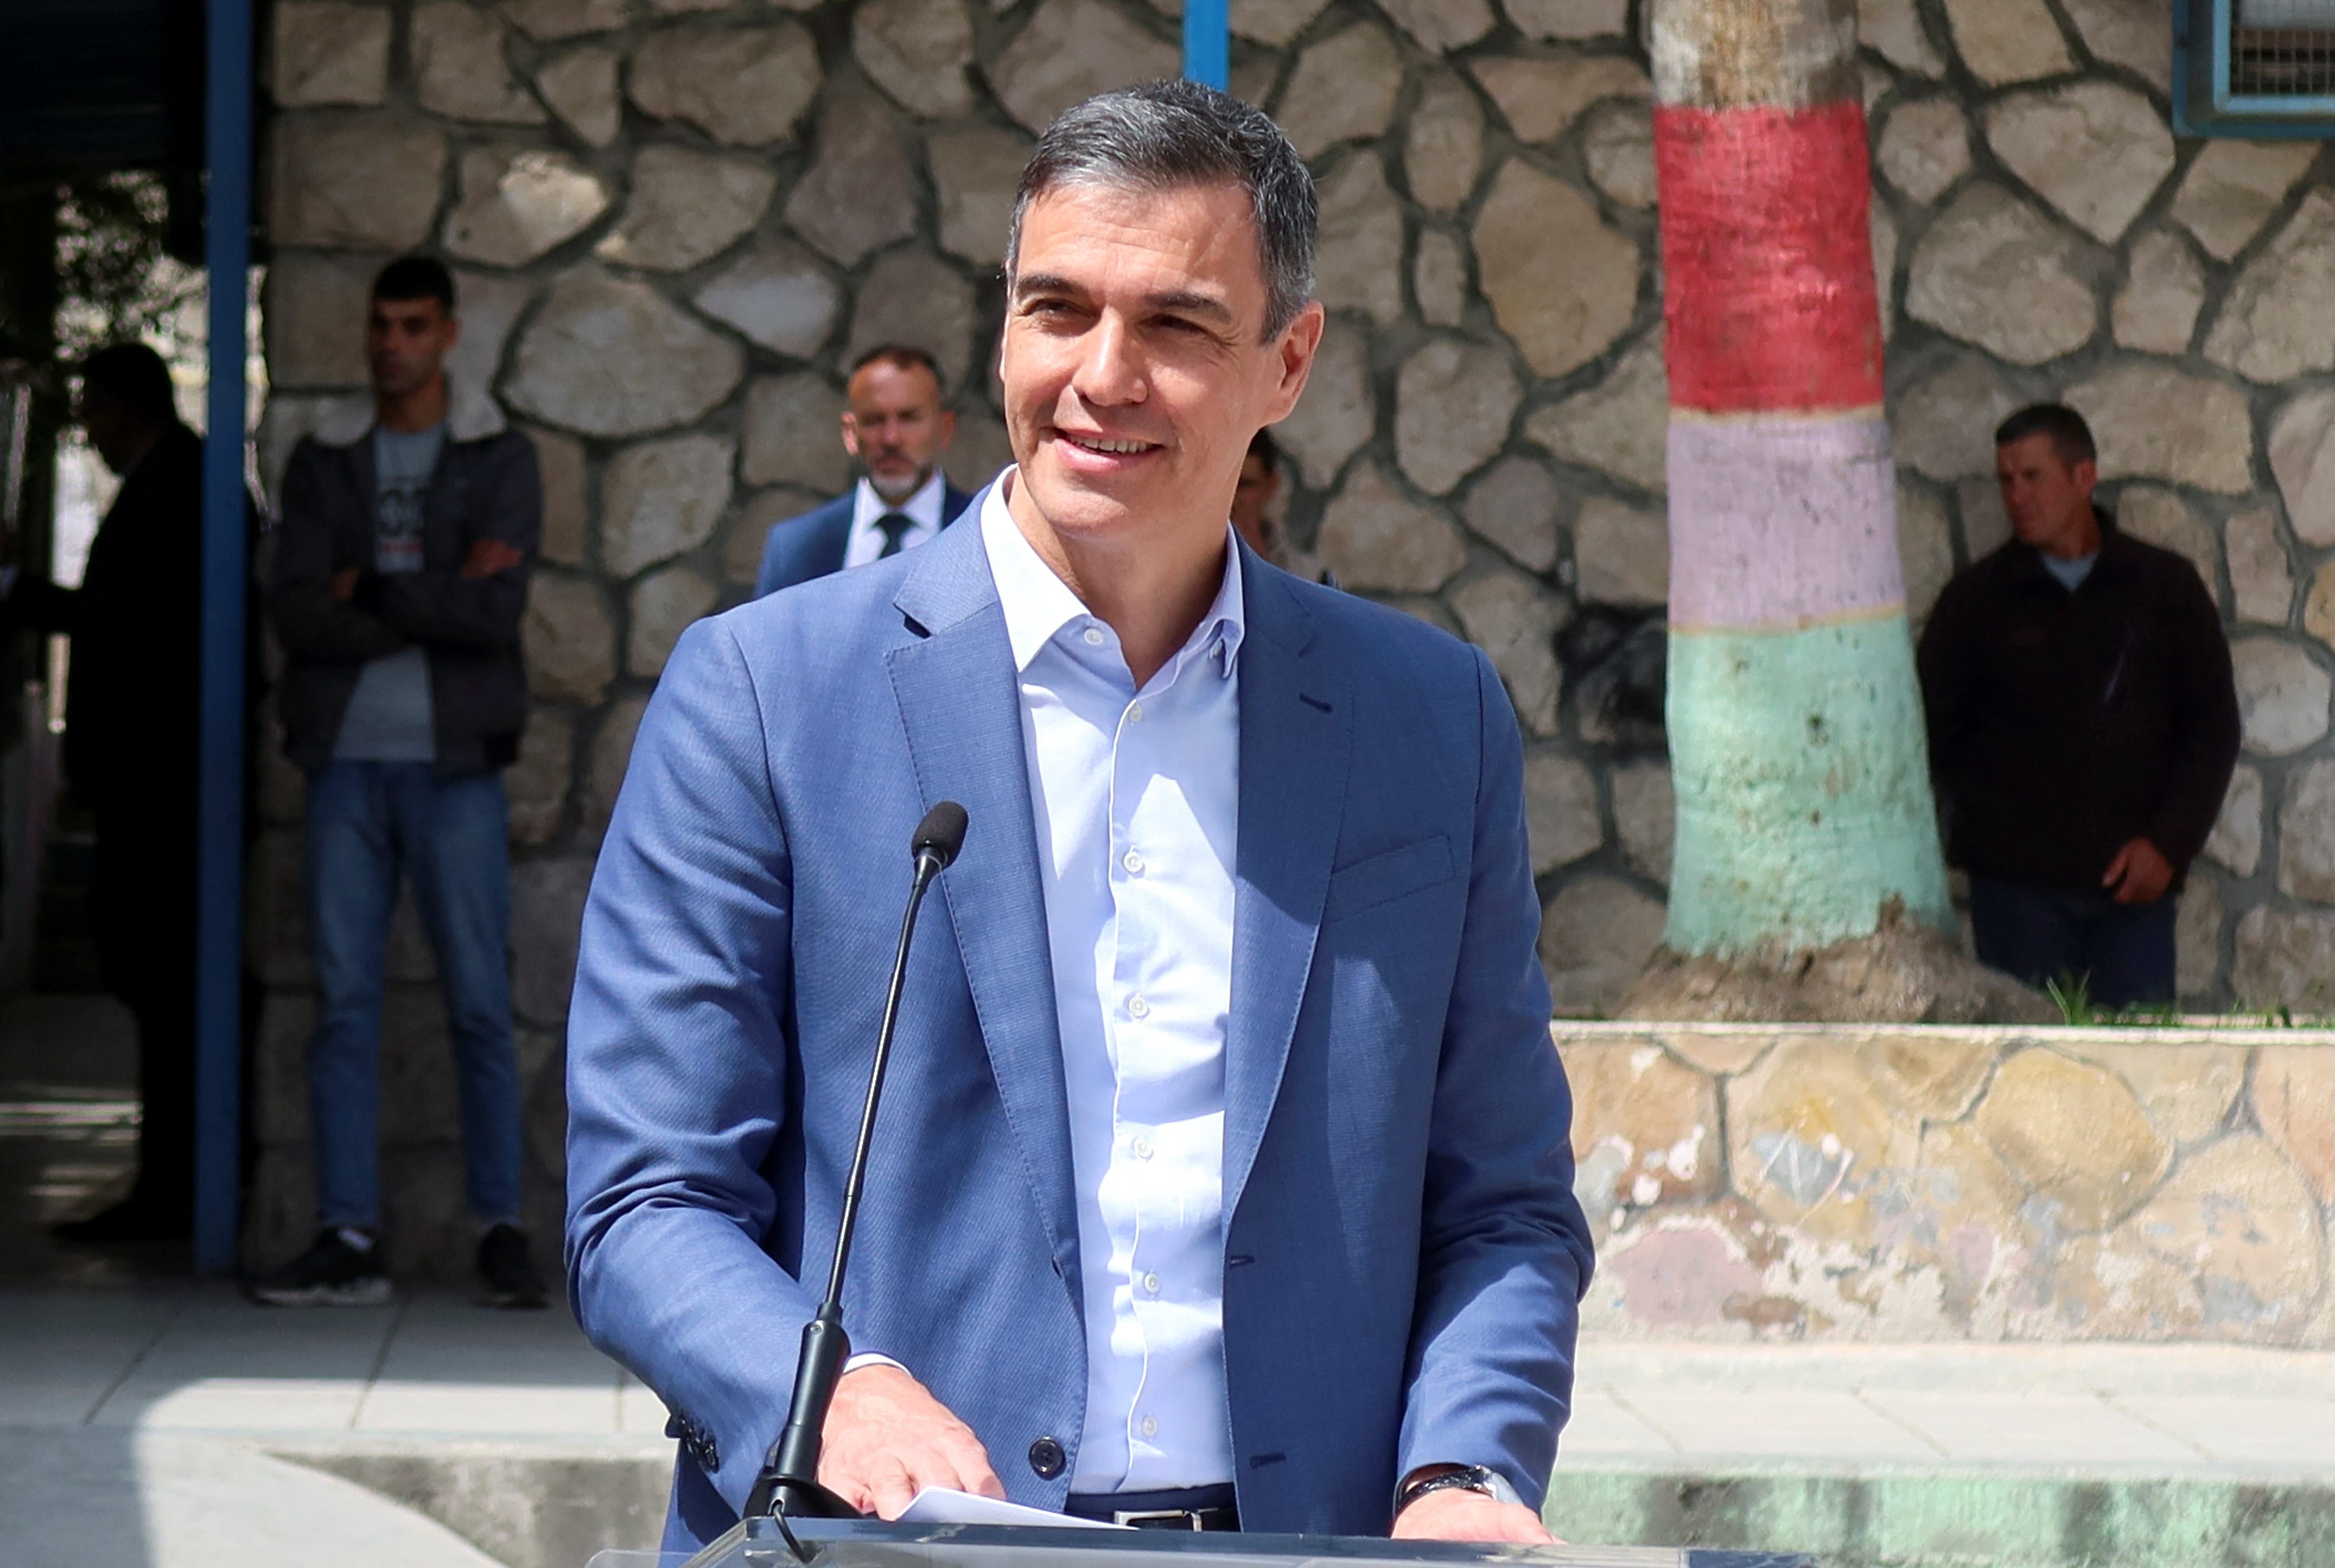 Spanish Prime Minister Pedro Sanchez speaks during a press conference in Amman